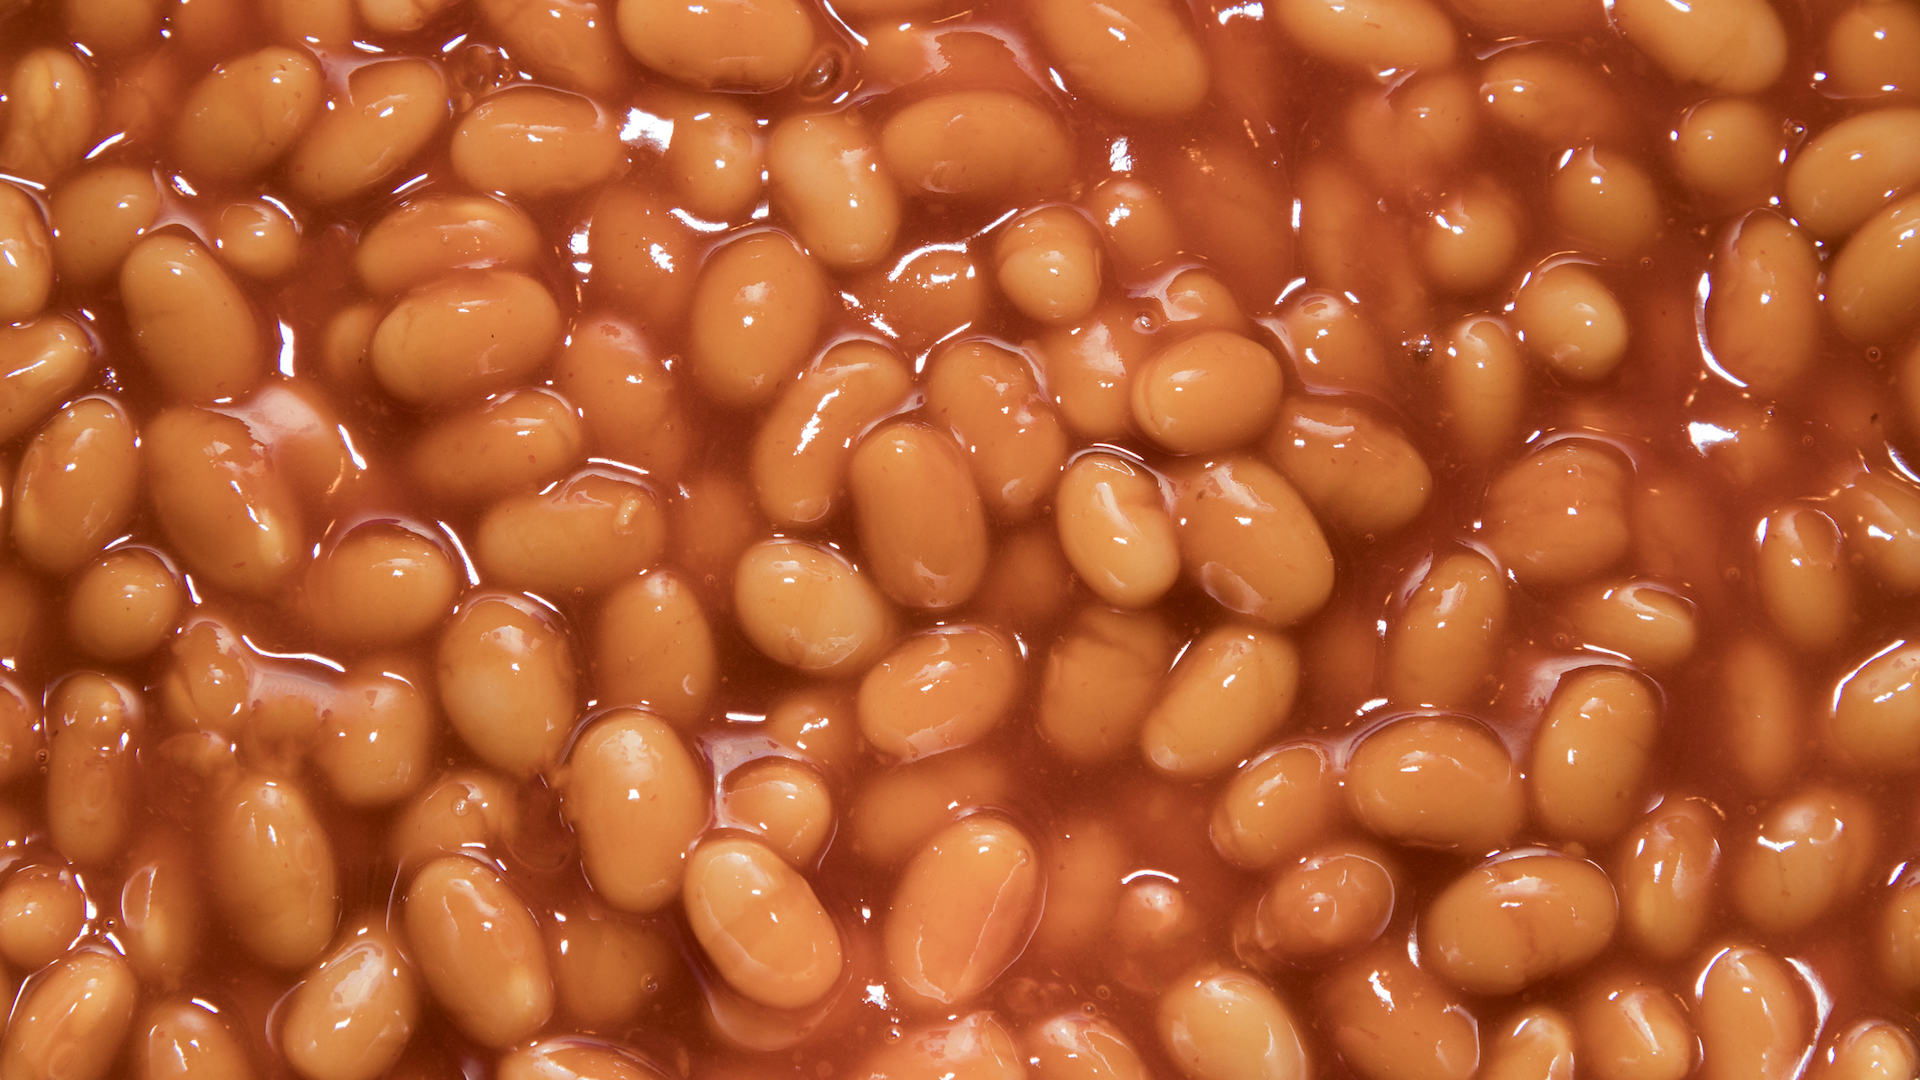 A big pile of baked beans